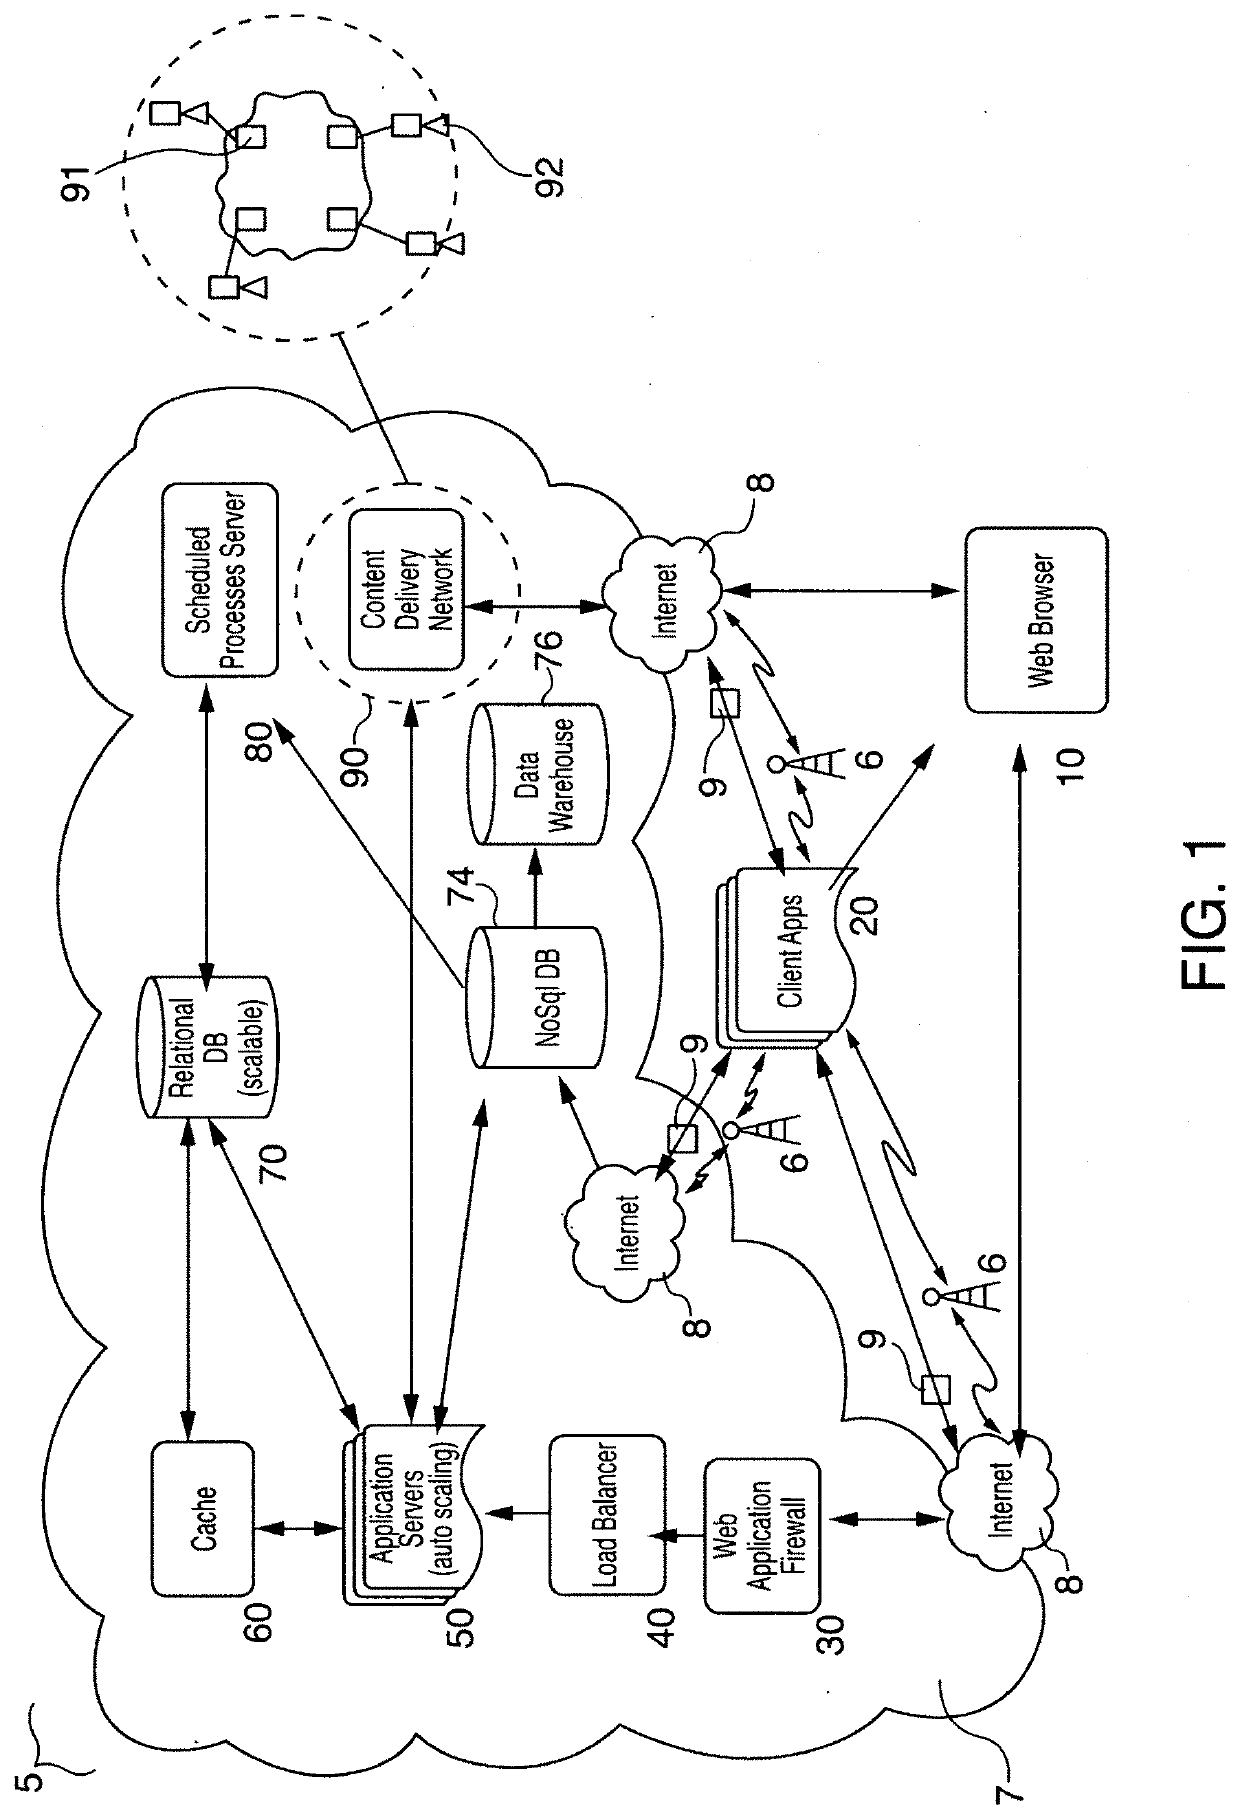 System, apparatus and method for organizing restaurant tasks and patrons' affairs